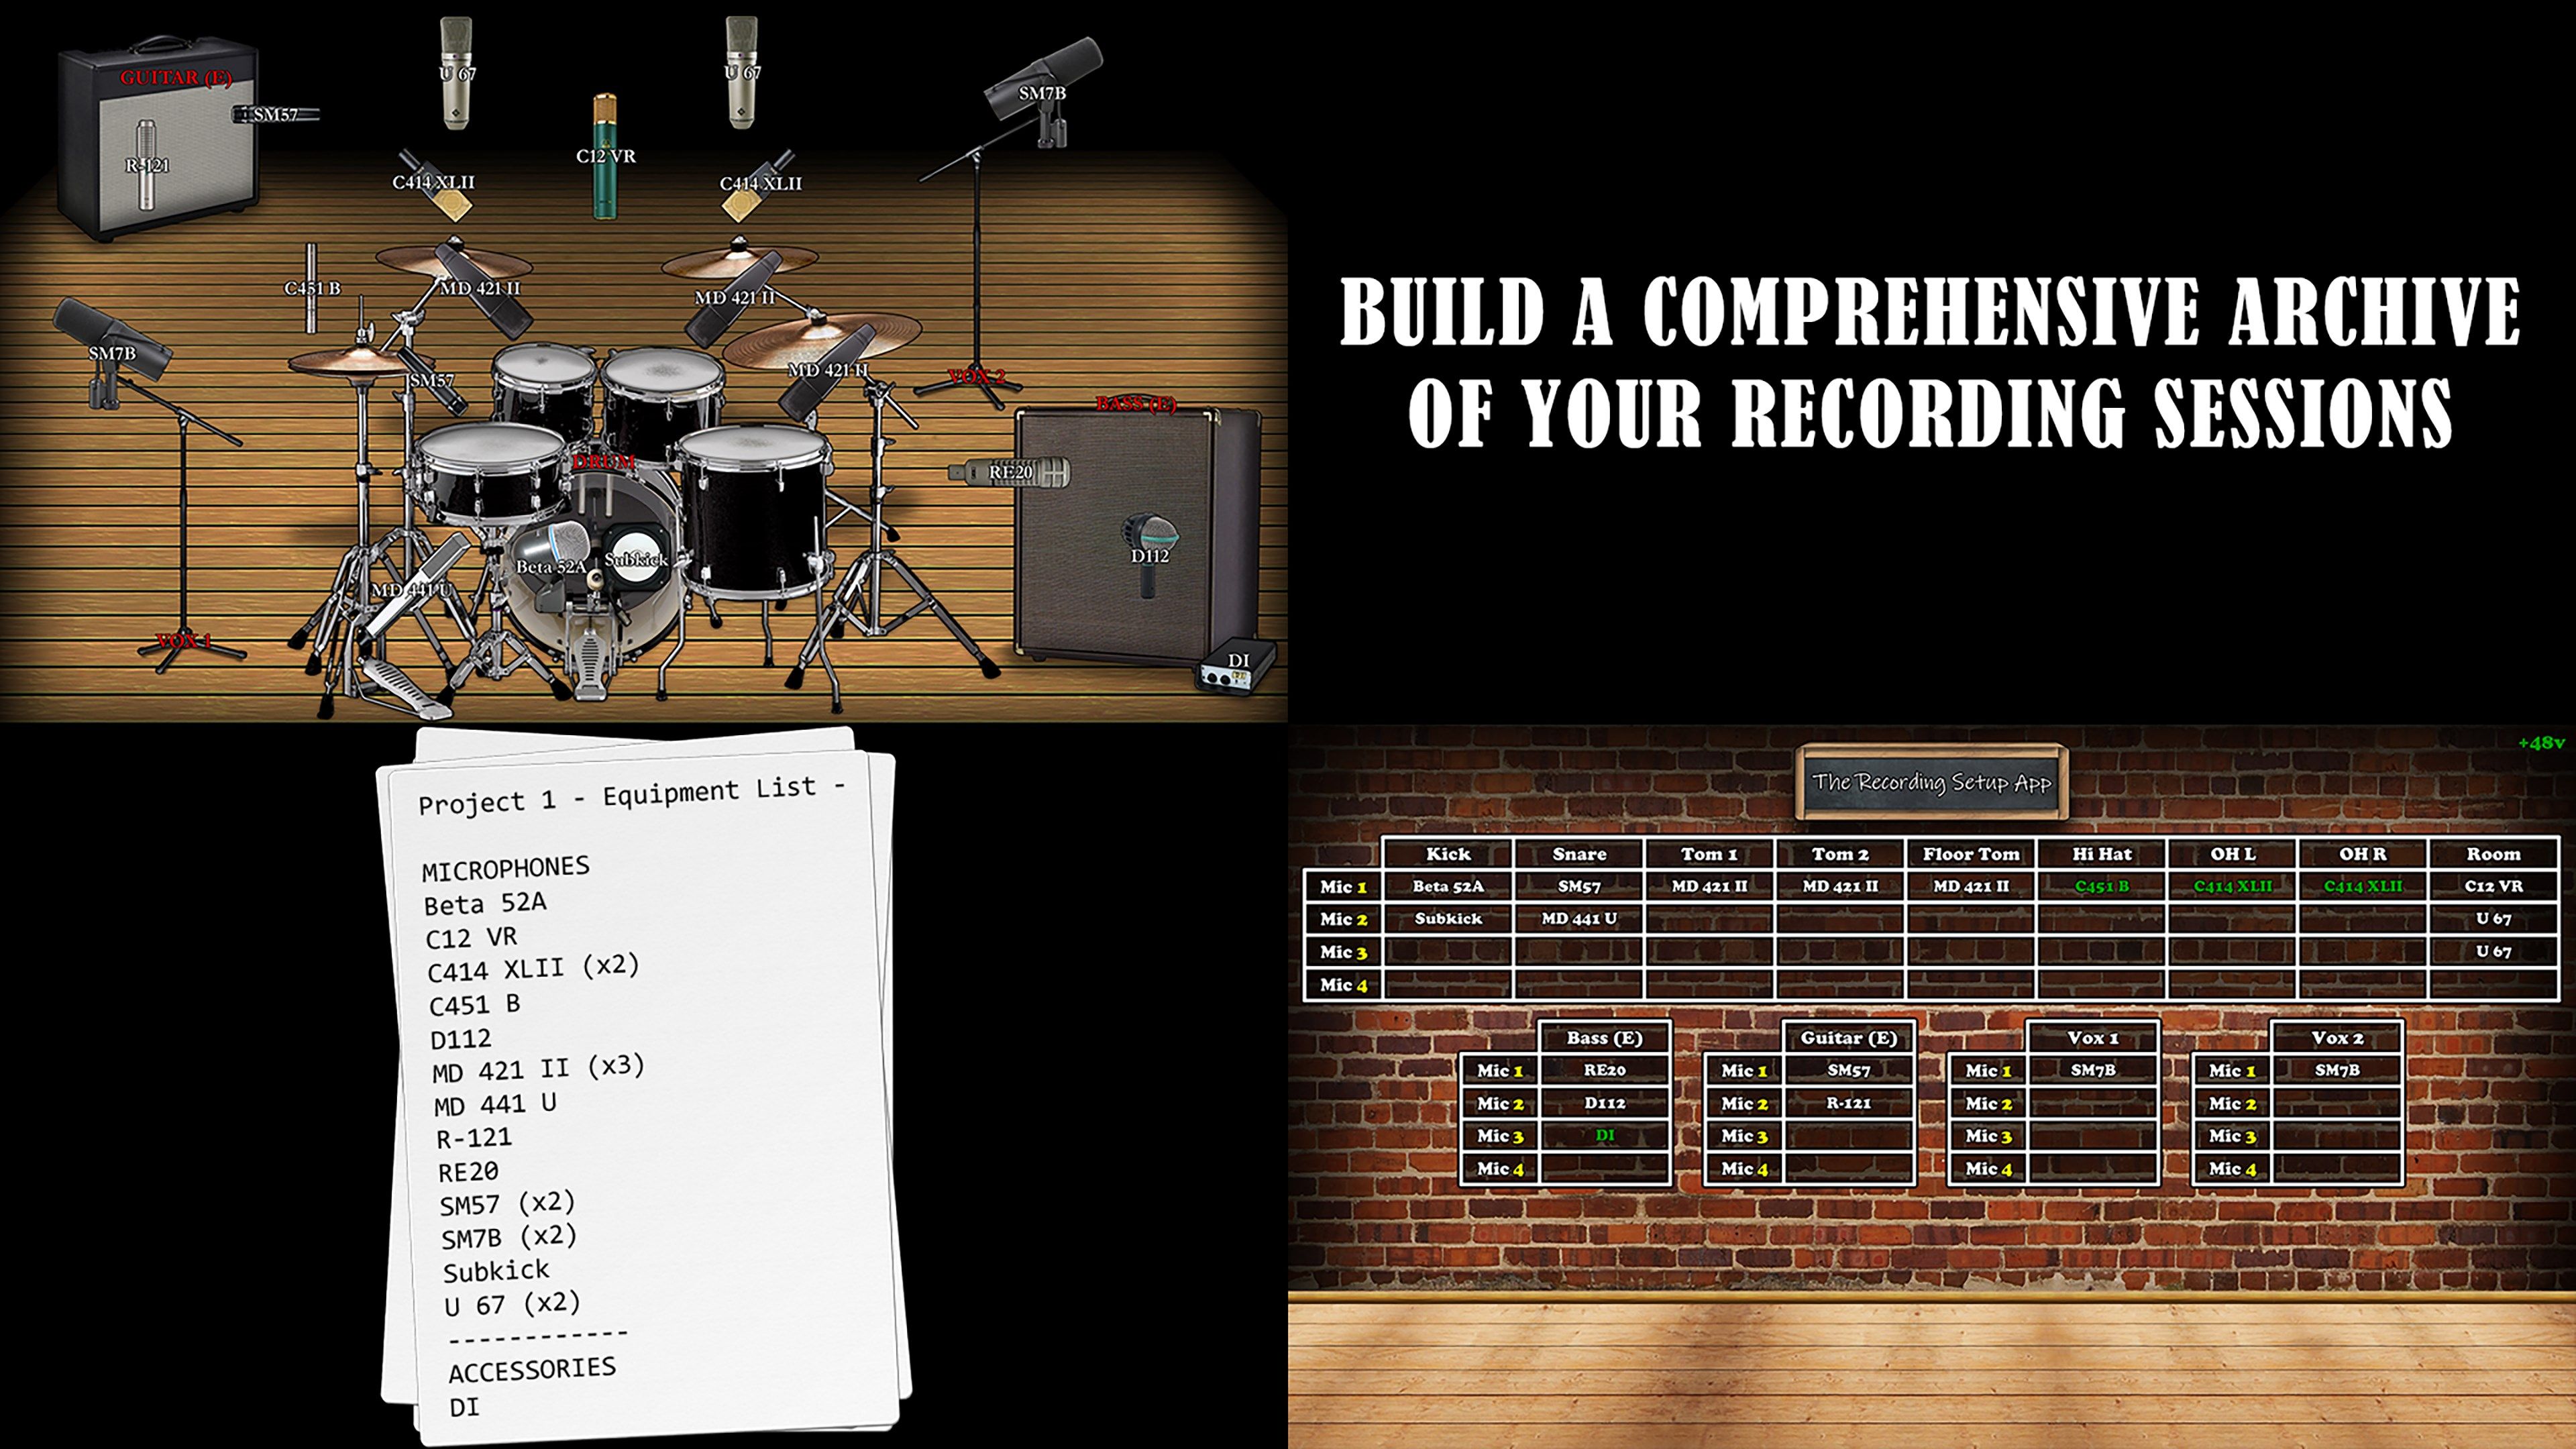 Build a comprehensive archive of your recording sessions